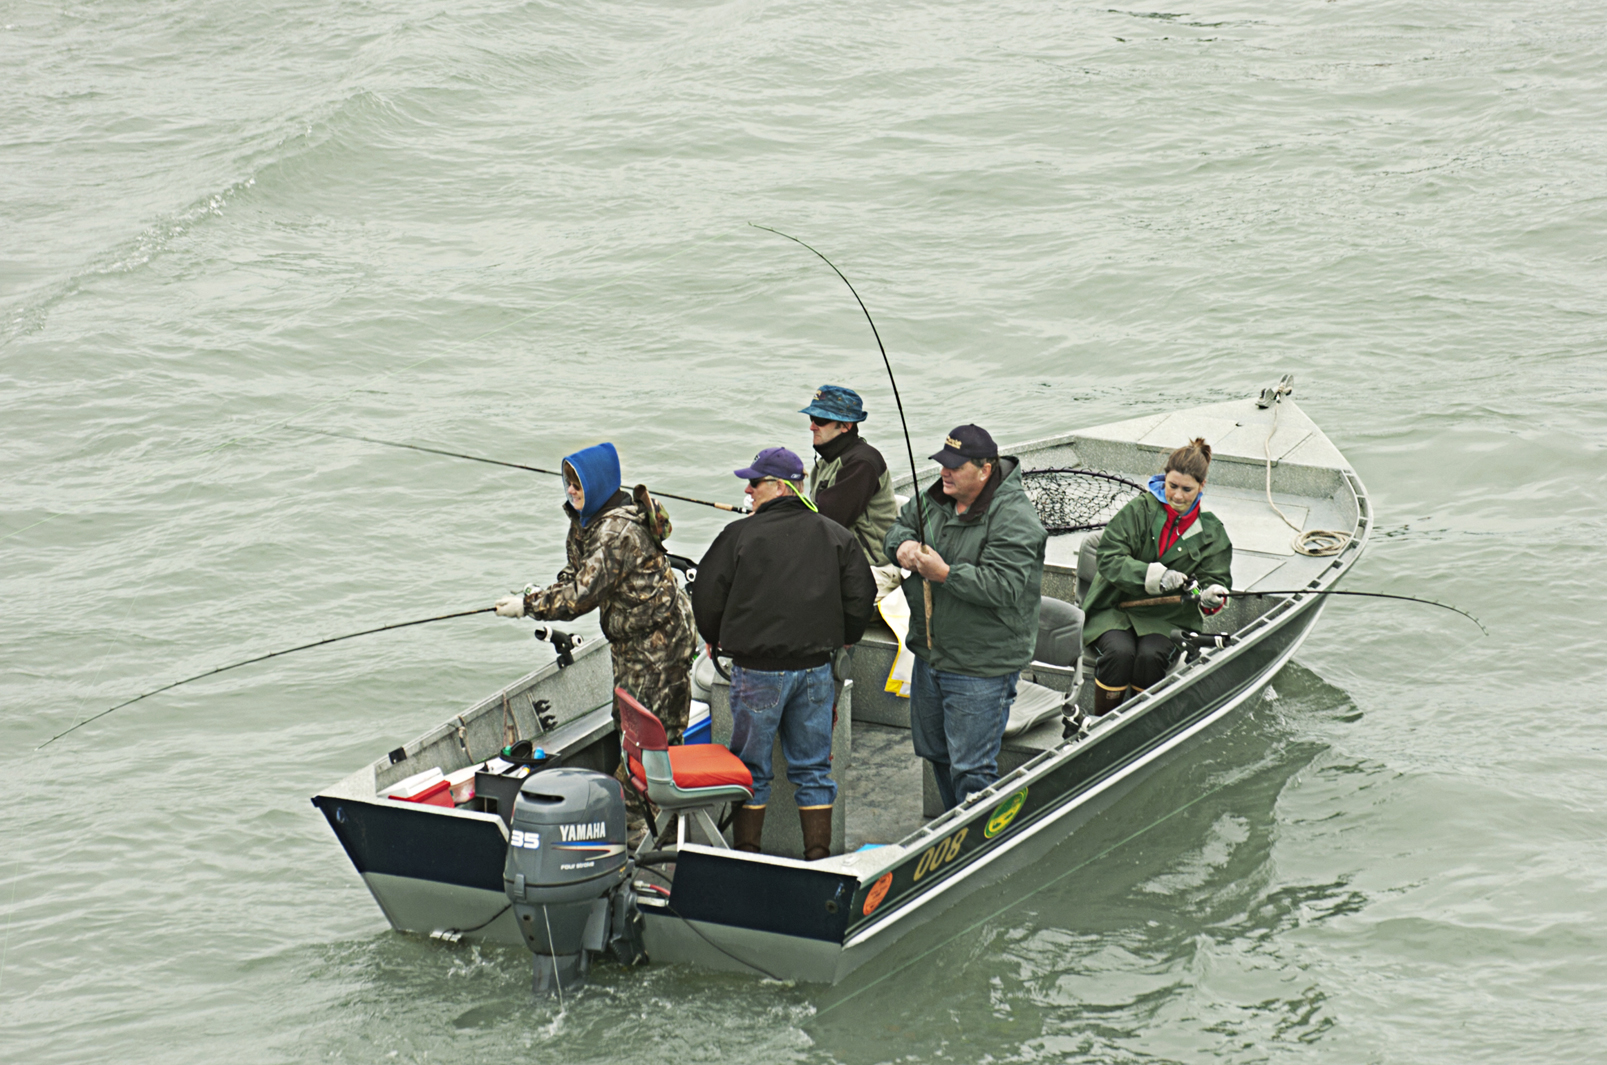 In this 2006 file photo, anglers work the Kenai River for king salmon near the Warren Ames Memorial Bridge. Conserving the Kenai River king salmon is a must for all users and represents a significant challenge for the Alaska Department of Fish and Game and the Board of Fisheries. The board meets to consider Cook Inlet salmon management beginning Jan. 31.-File photo, Morris News Service - Alaska